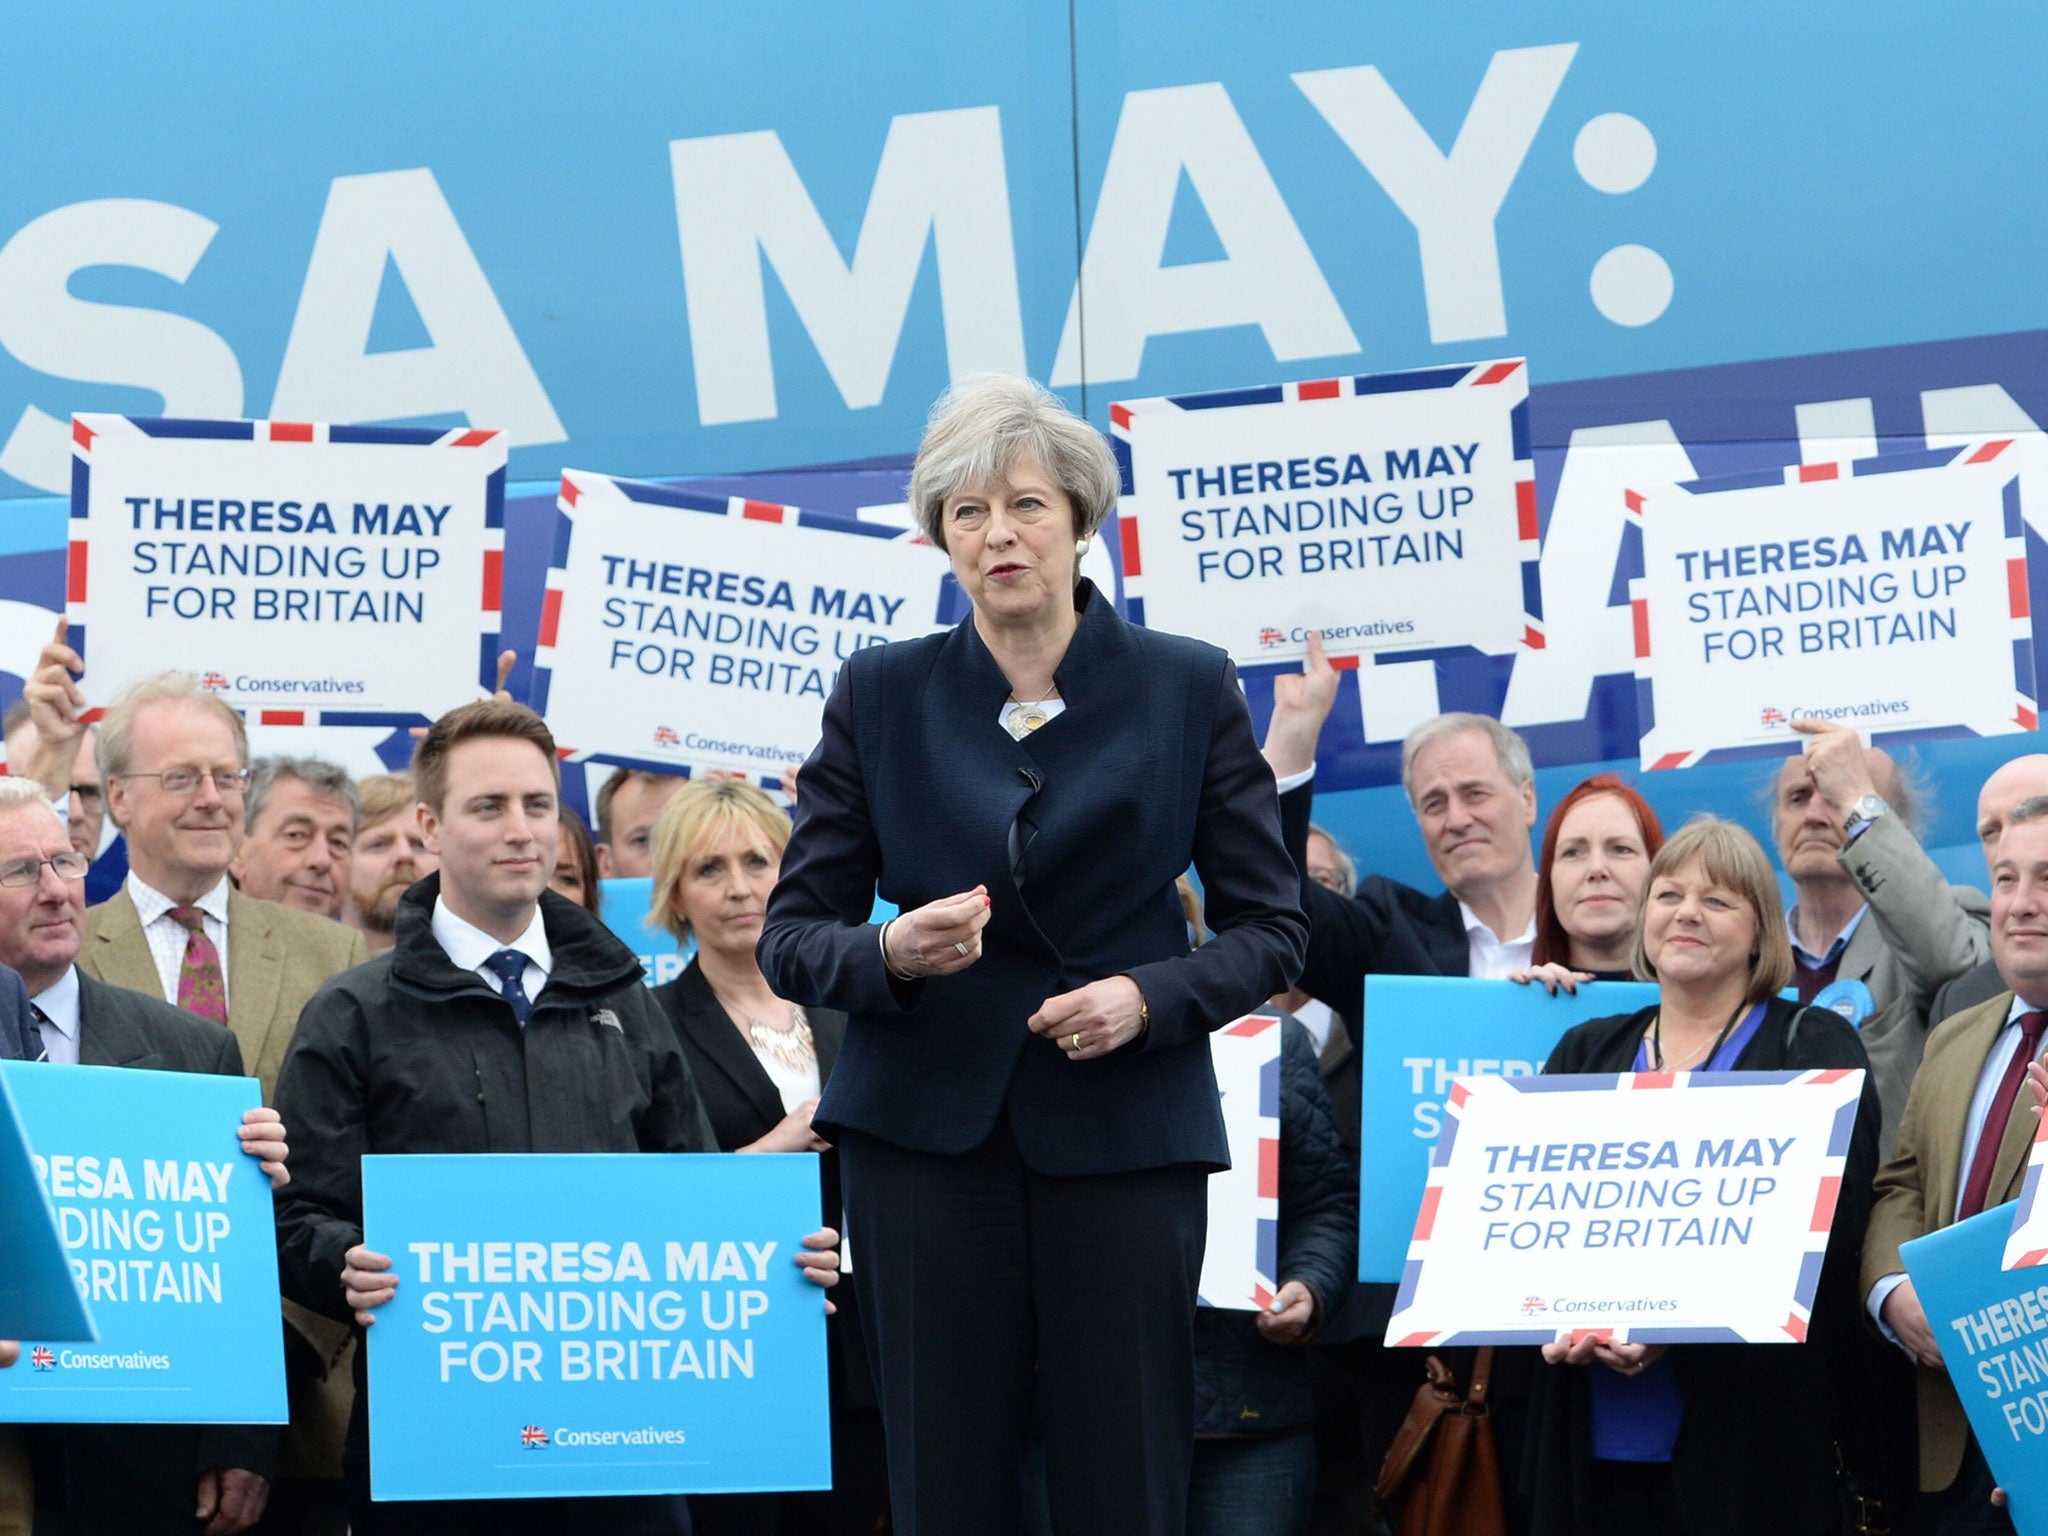 The allegations against Theresa May’s party have been described as ‘extremely serious’